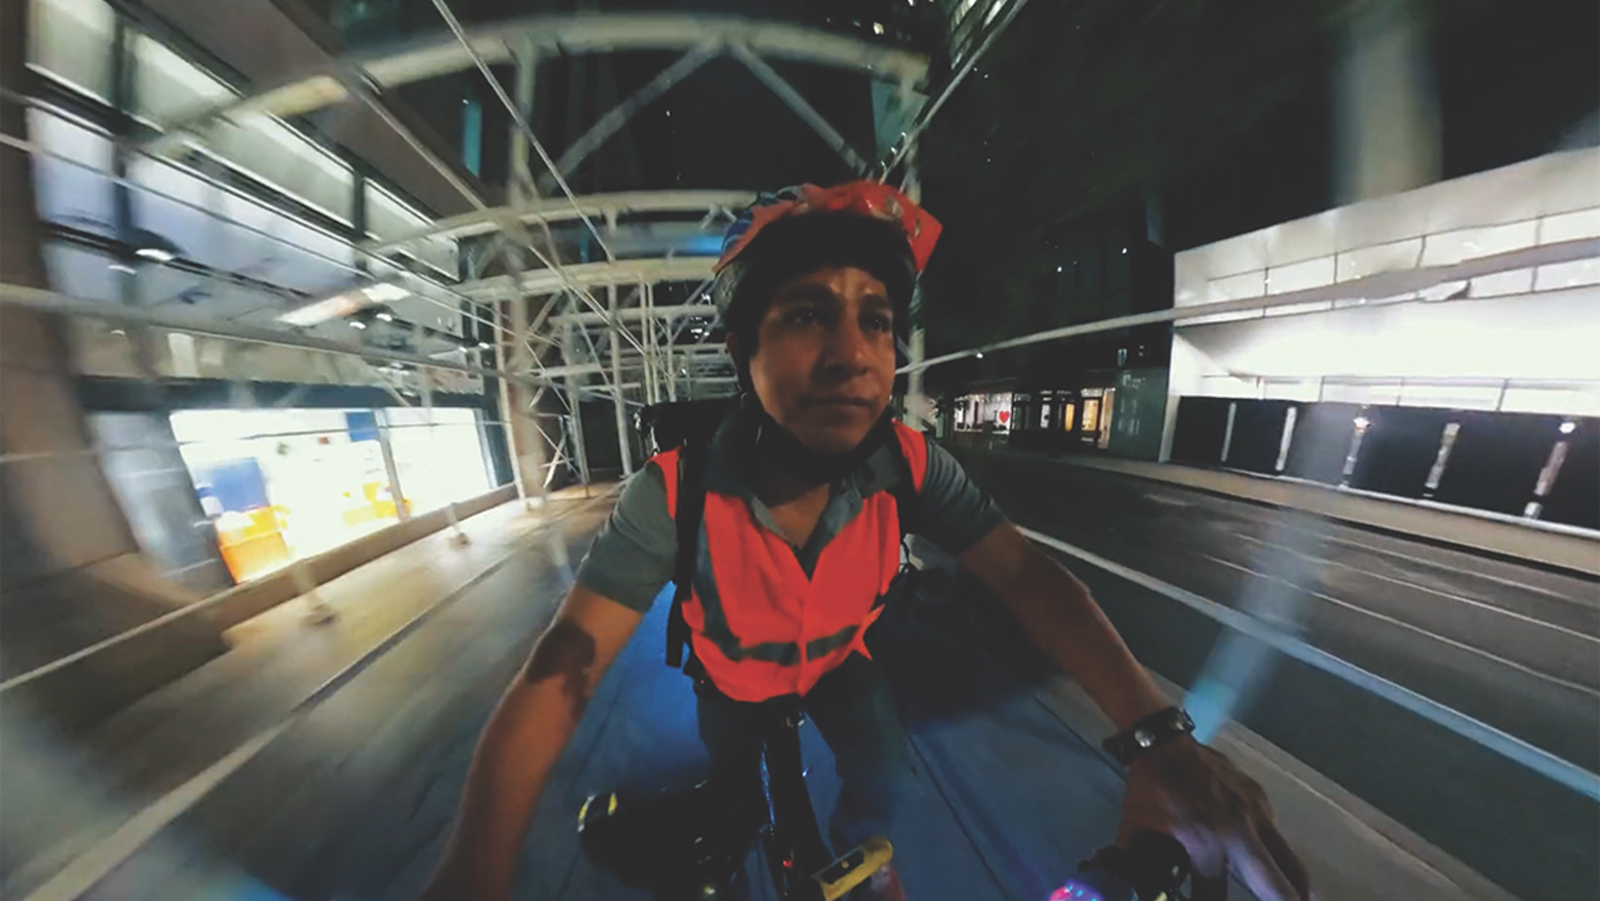 A man in a red bike helmet rides a bicycle facing camera, through city scaffolding